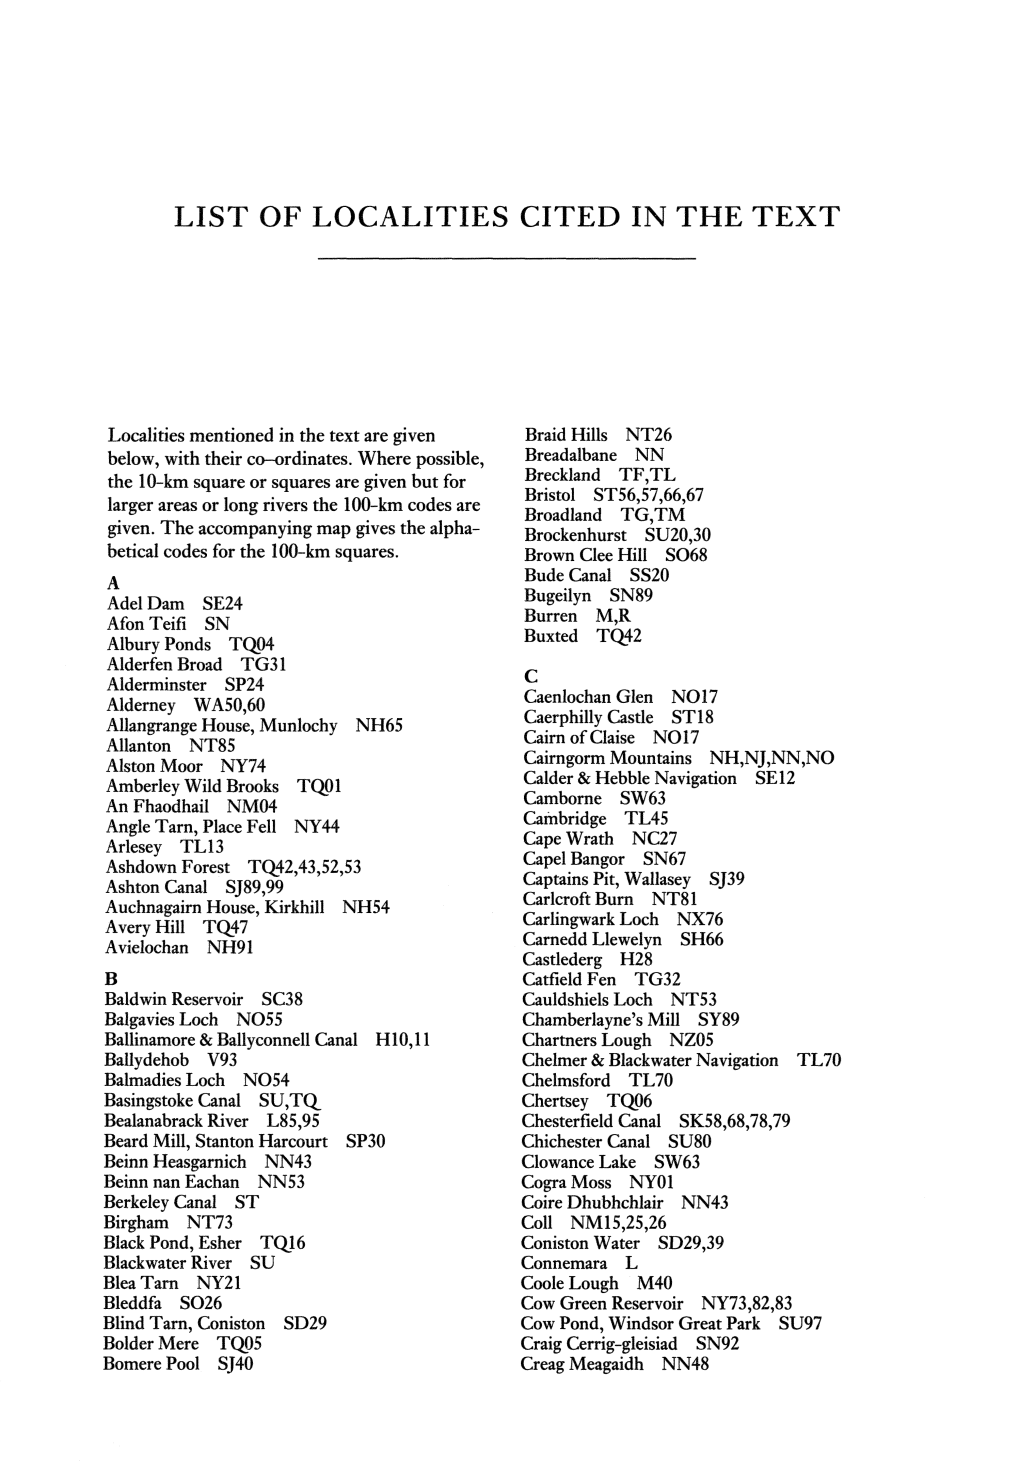 List of Localities Cited in the Text